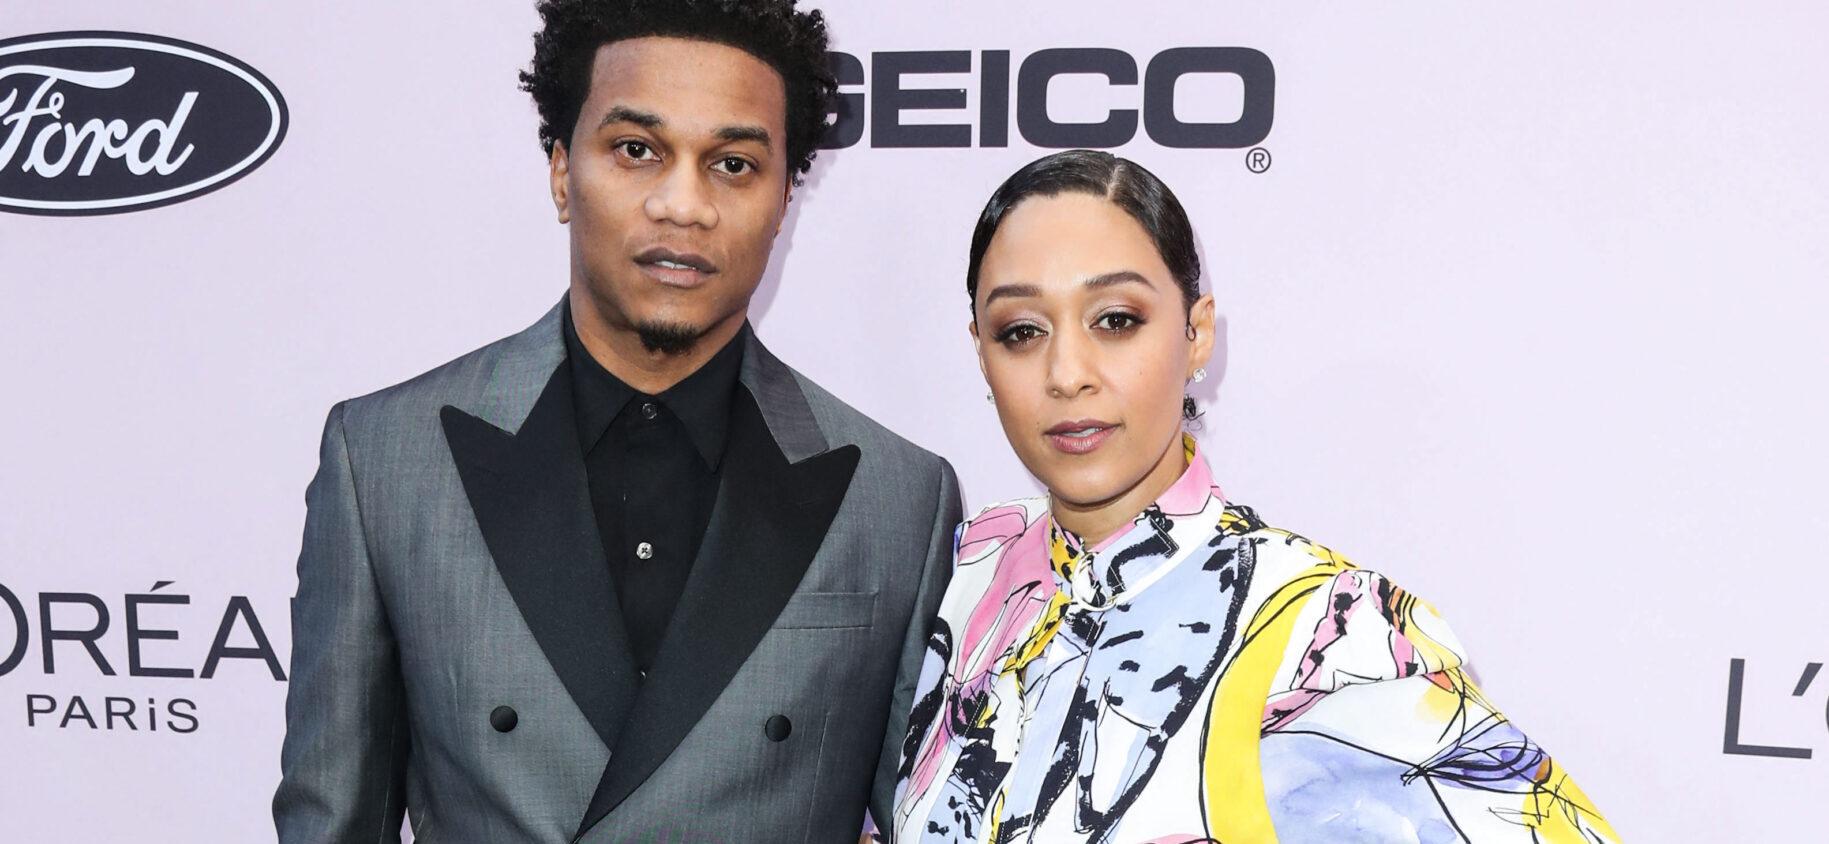 Tia Mowry Settles Divorce Will Pay ZERO In Spousal & Child Support